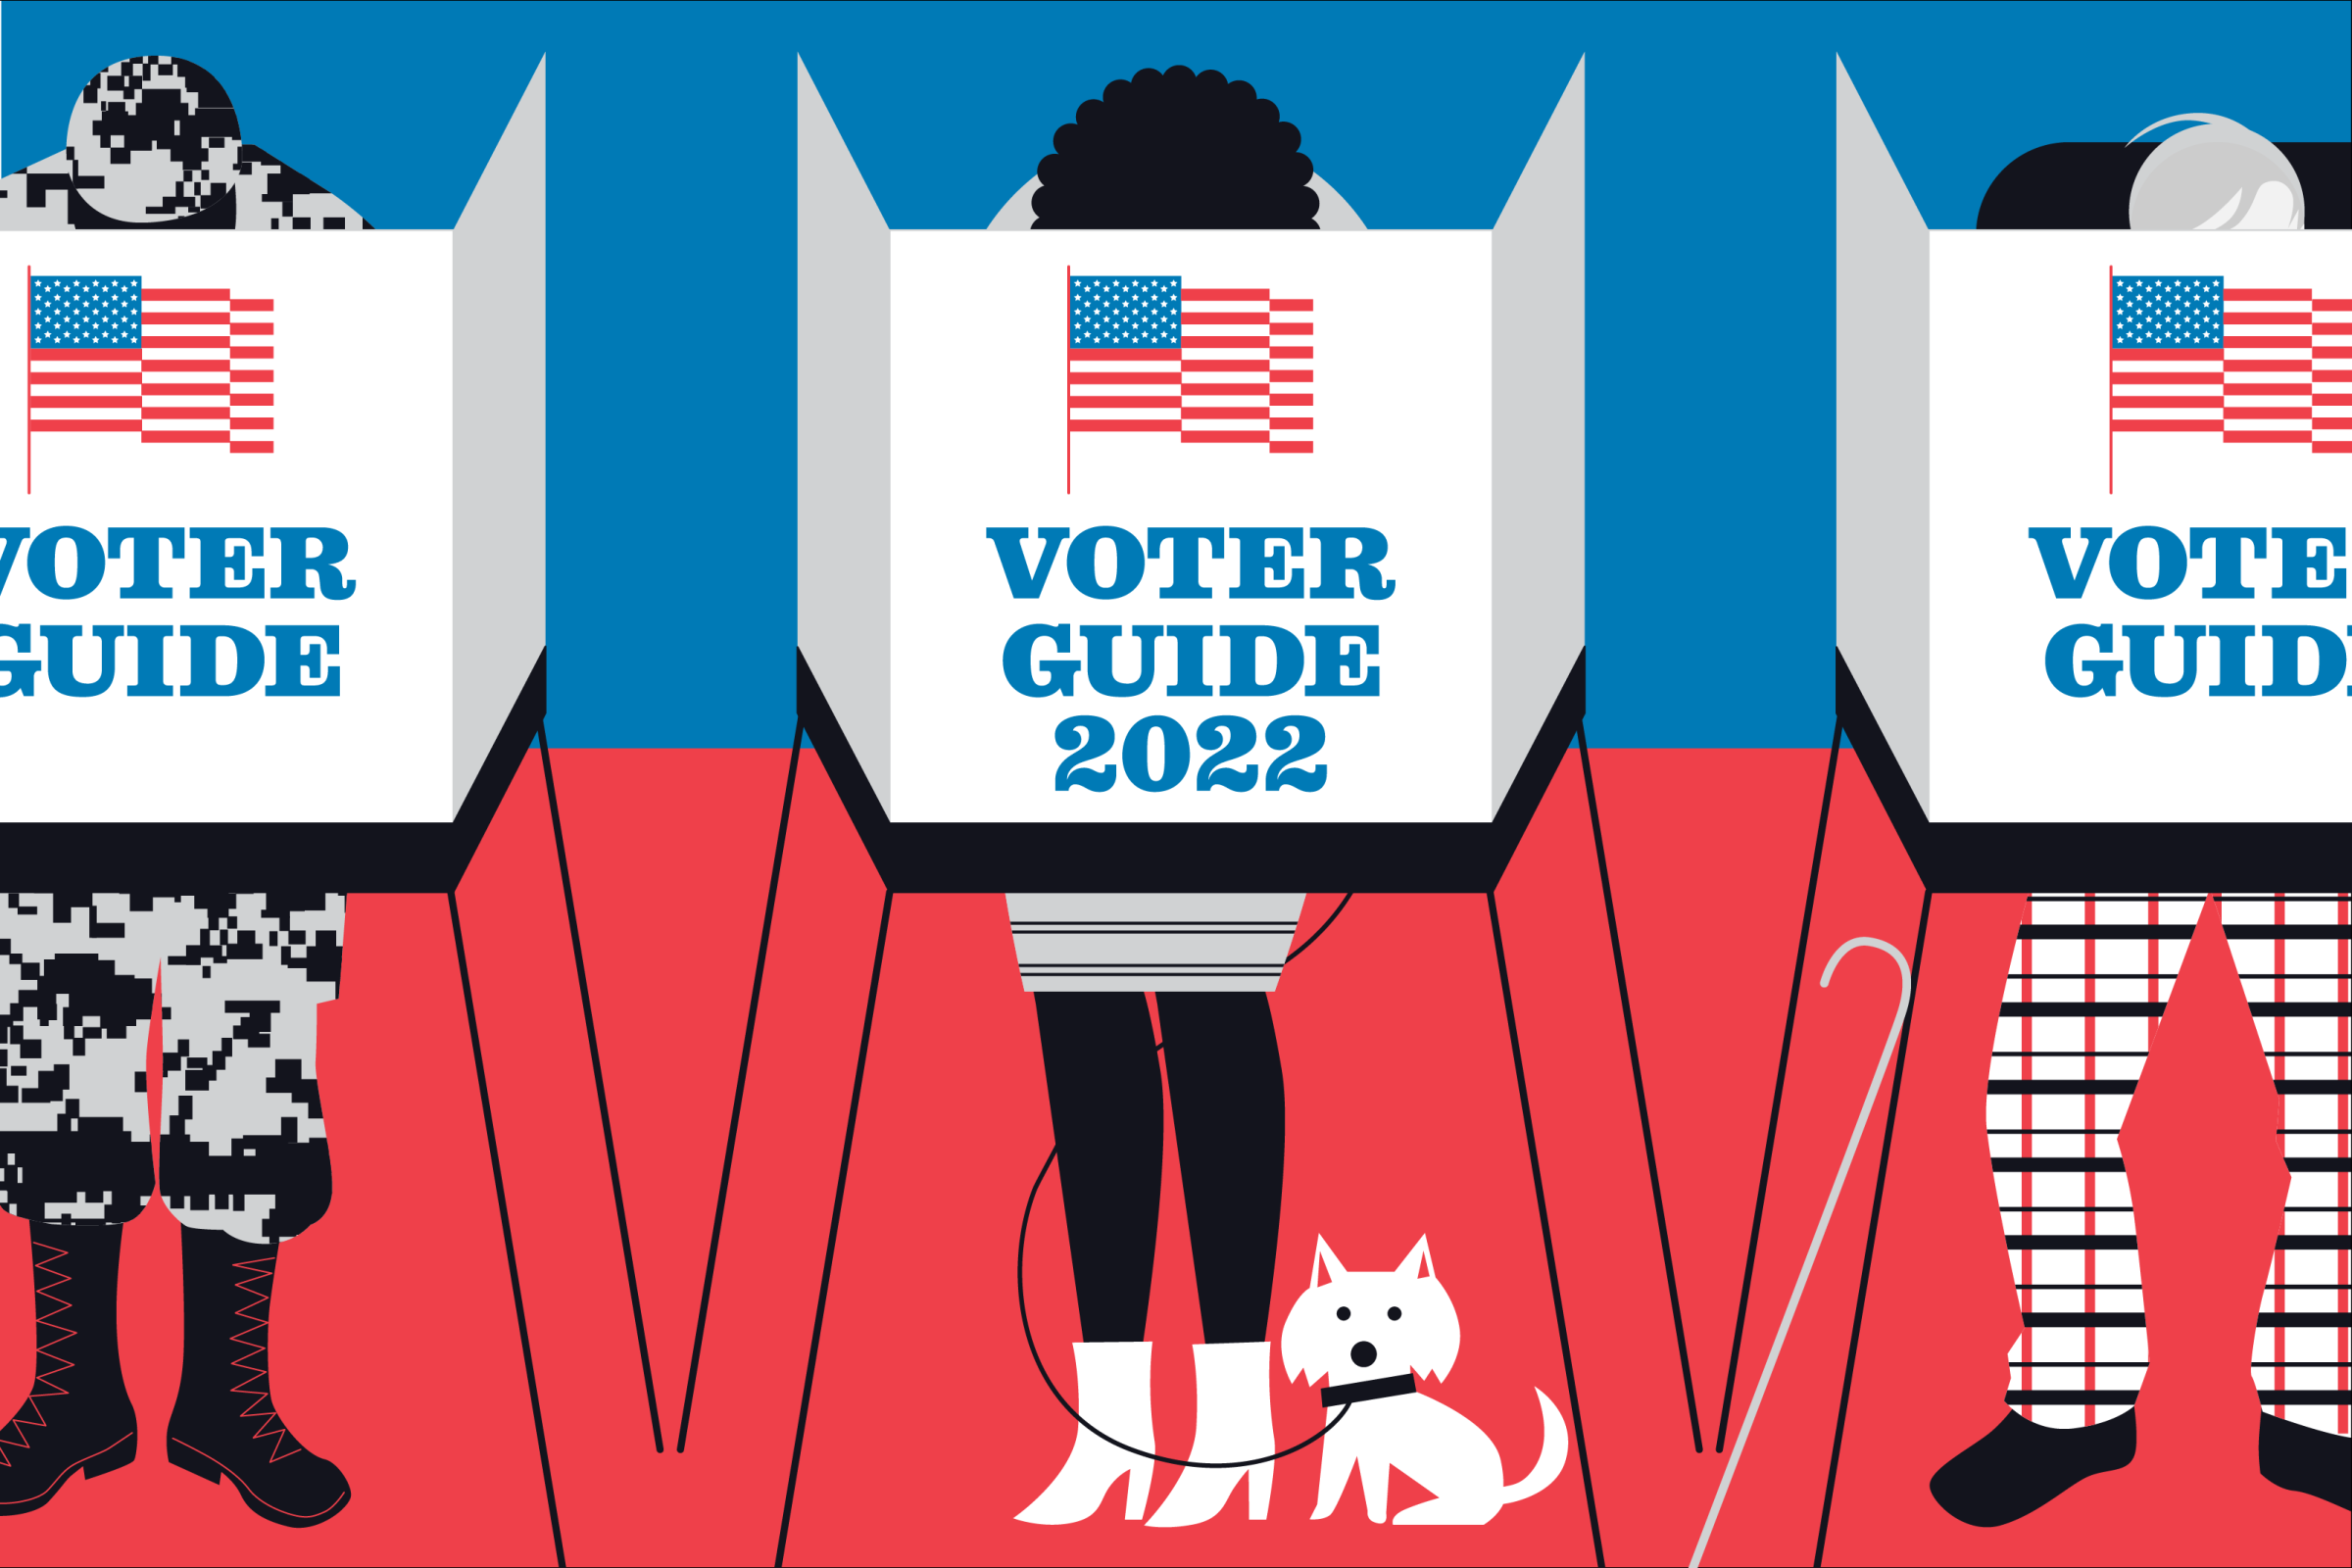 An illustrated graphics shows the legs of three people standing behind voting booths, one with a small white dog at her feet